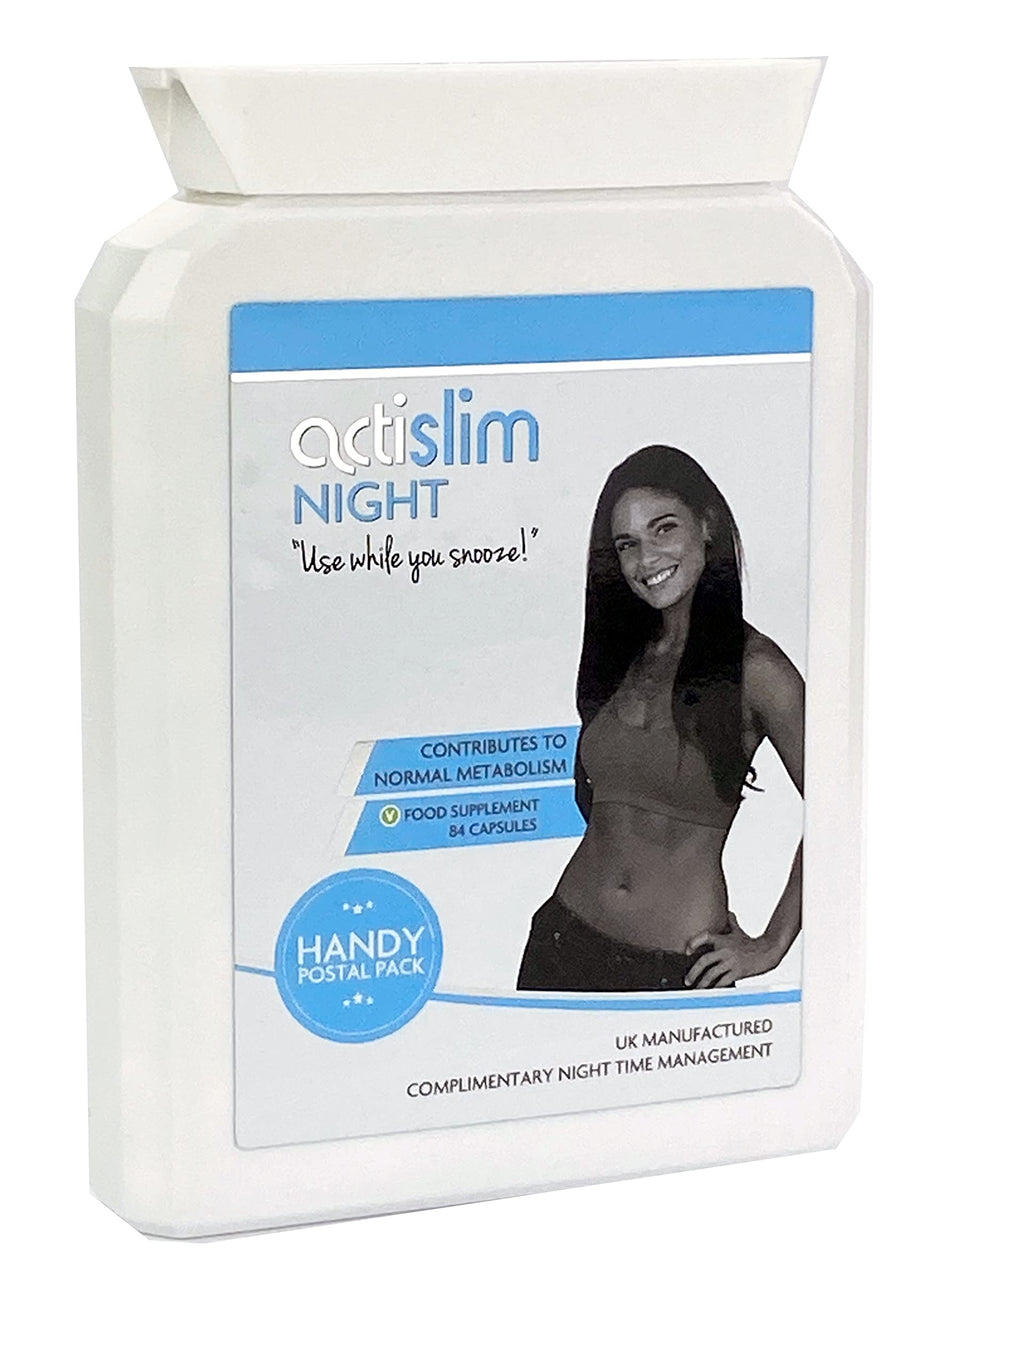 Actislim Night Works While You Sleep, Helps to Maintain Target Weight, Contains Vitamin B6 and Apple Cider Vinegar, 6 Week Course, 90 Capsules - BeesActive Australia